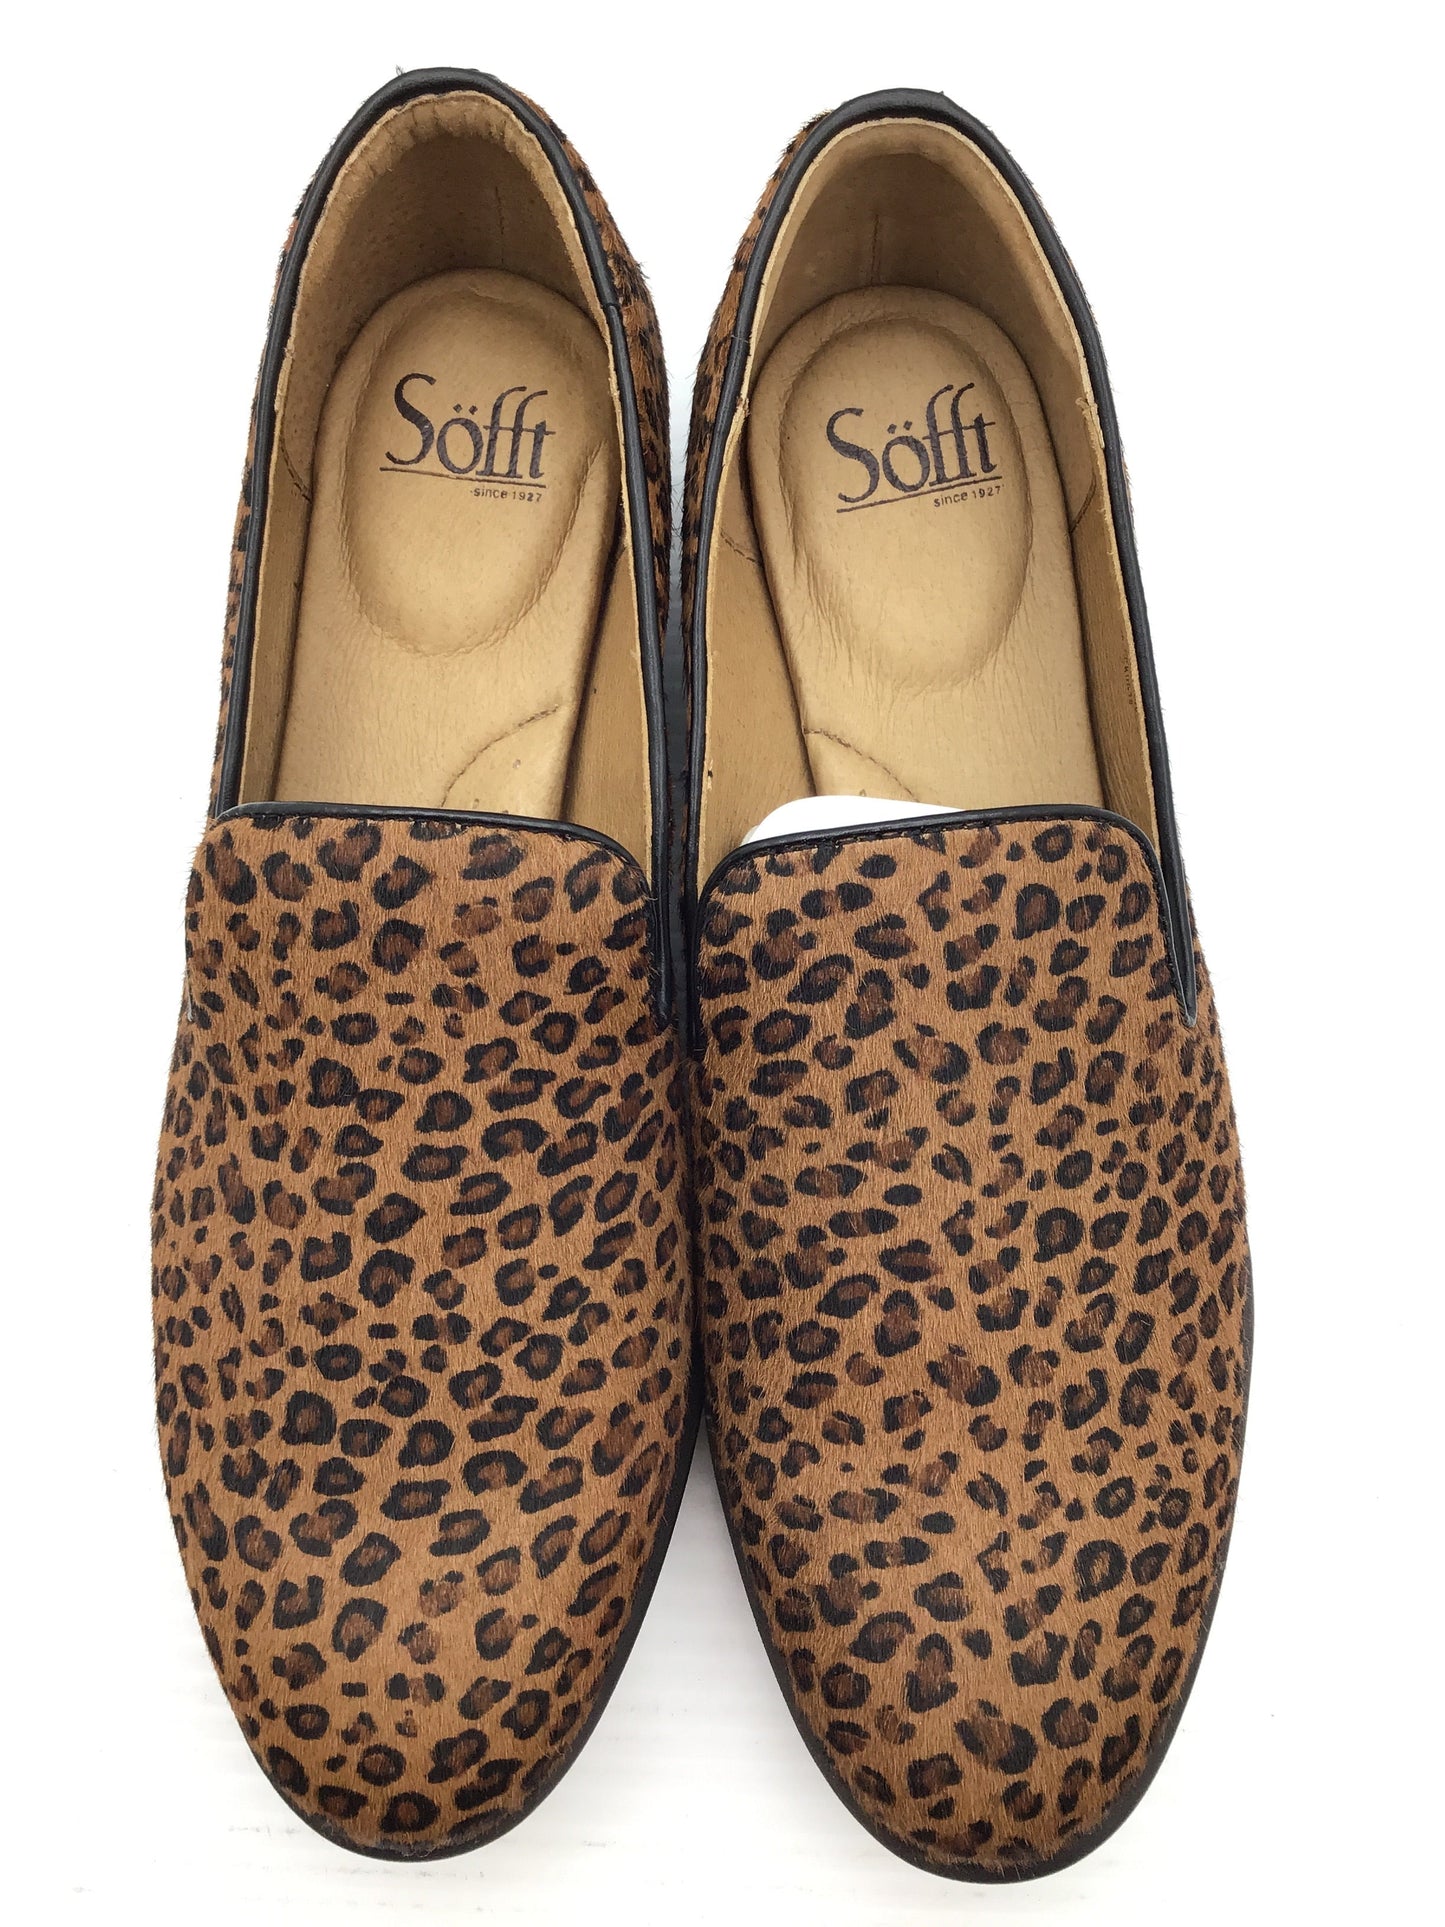 Shoes Flats Loafer Oxford By Sofft  Size: 9.5